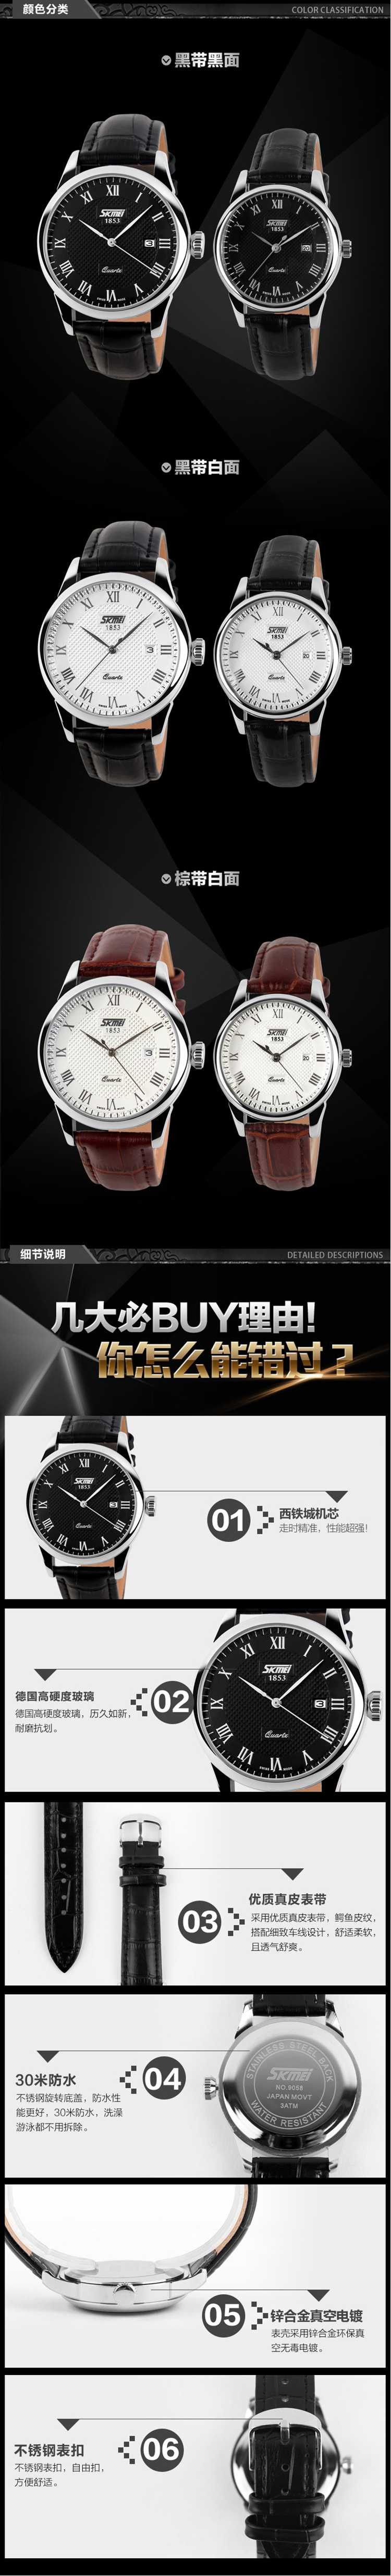 Classic Unique Leather Pair Watches for Men and Women (2)